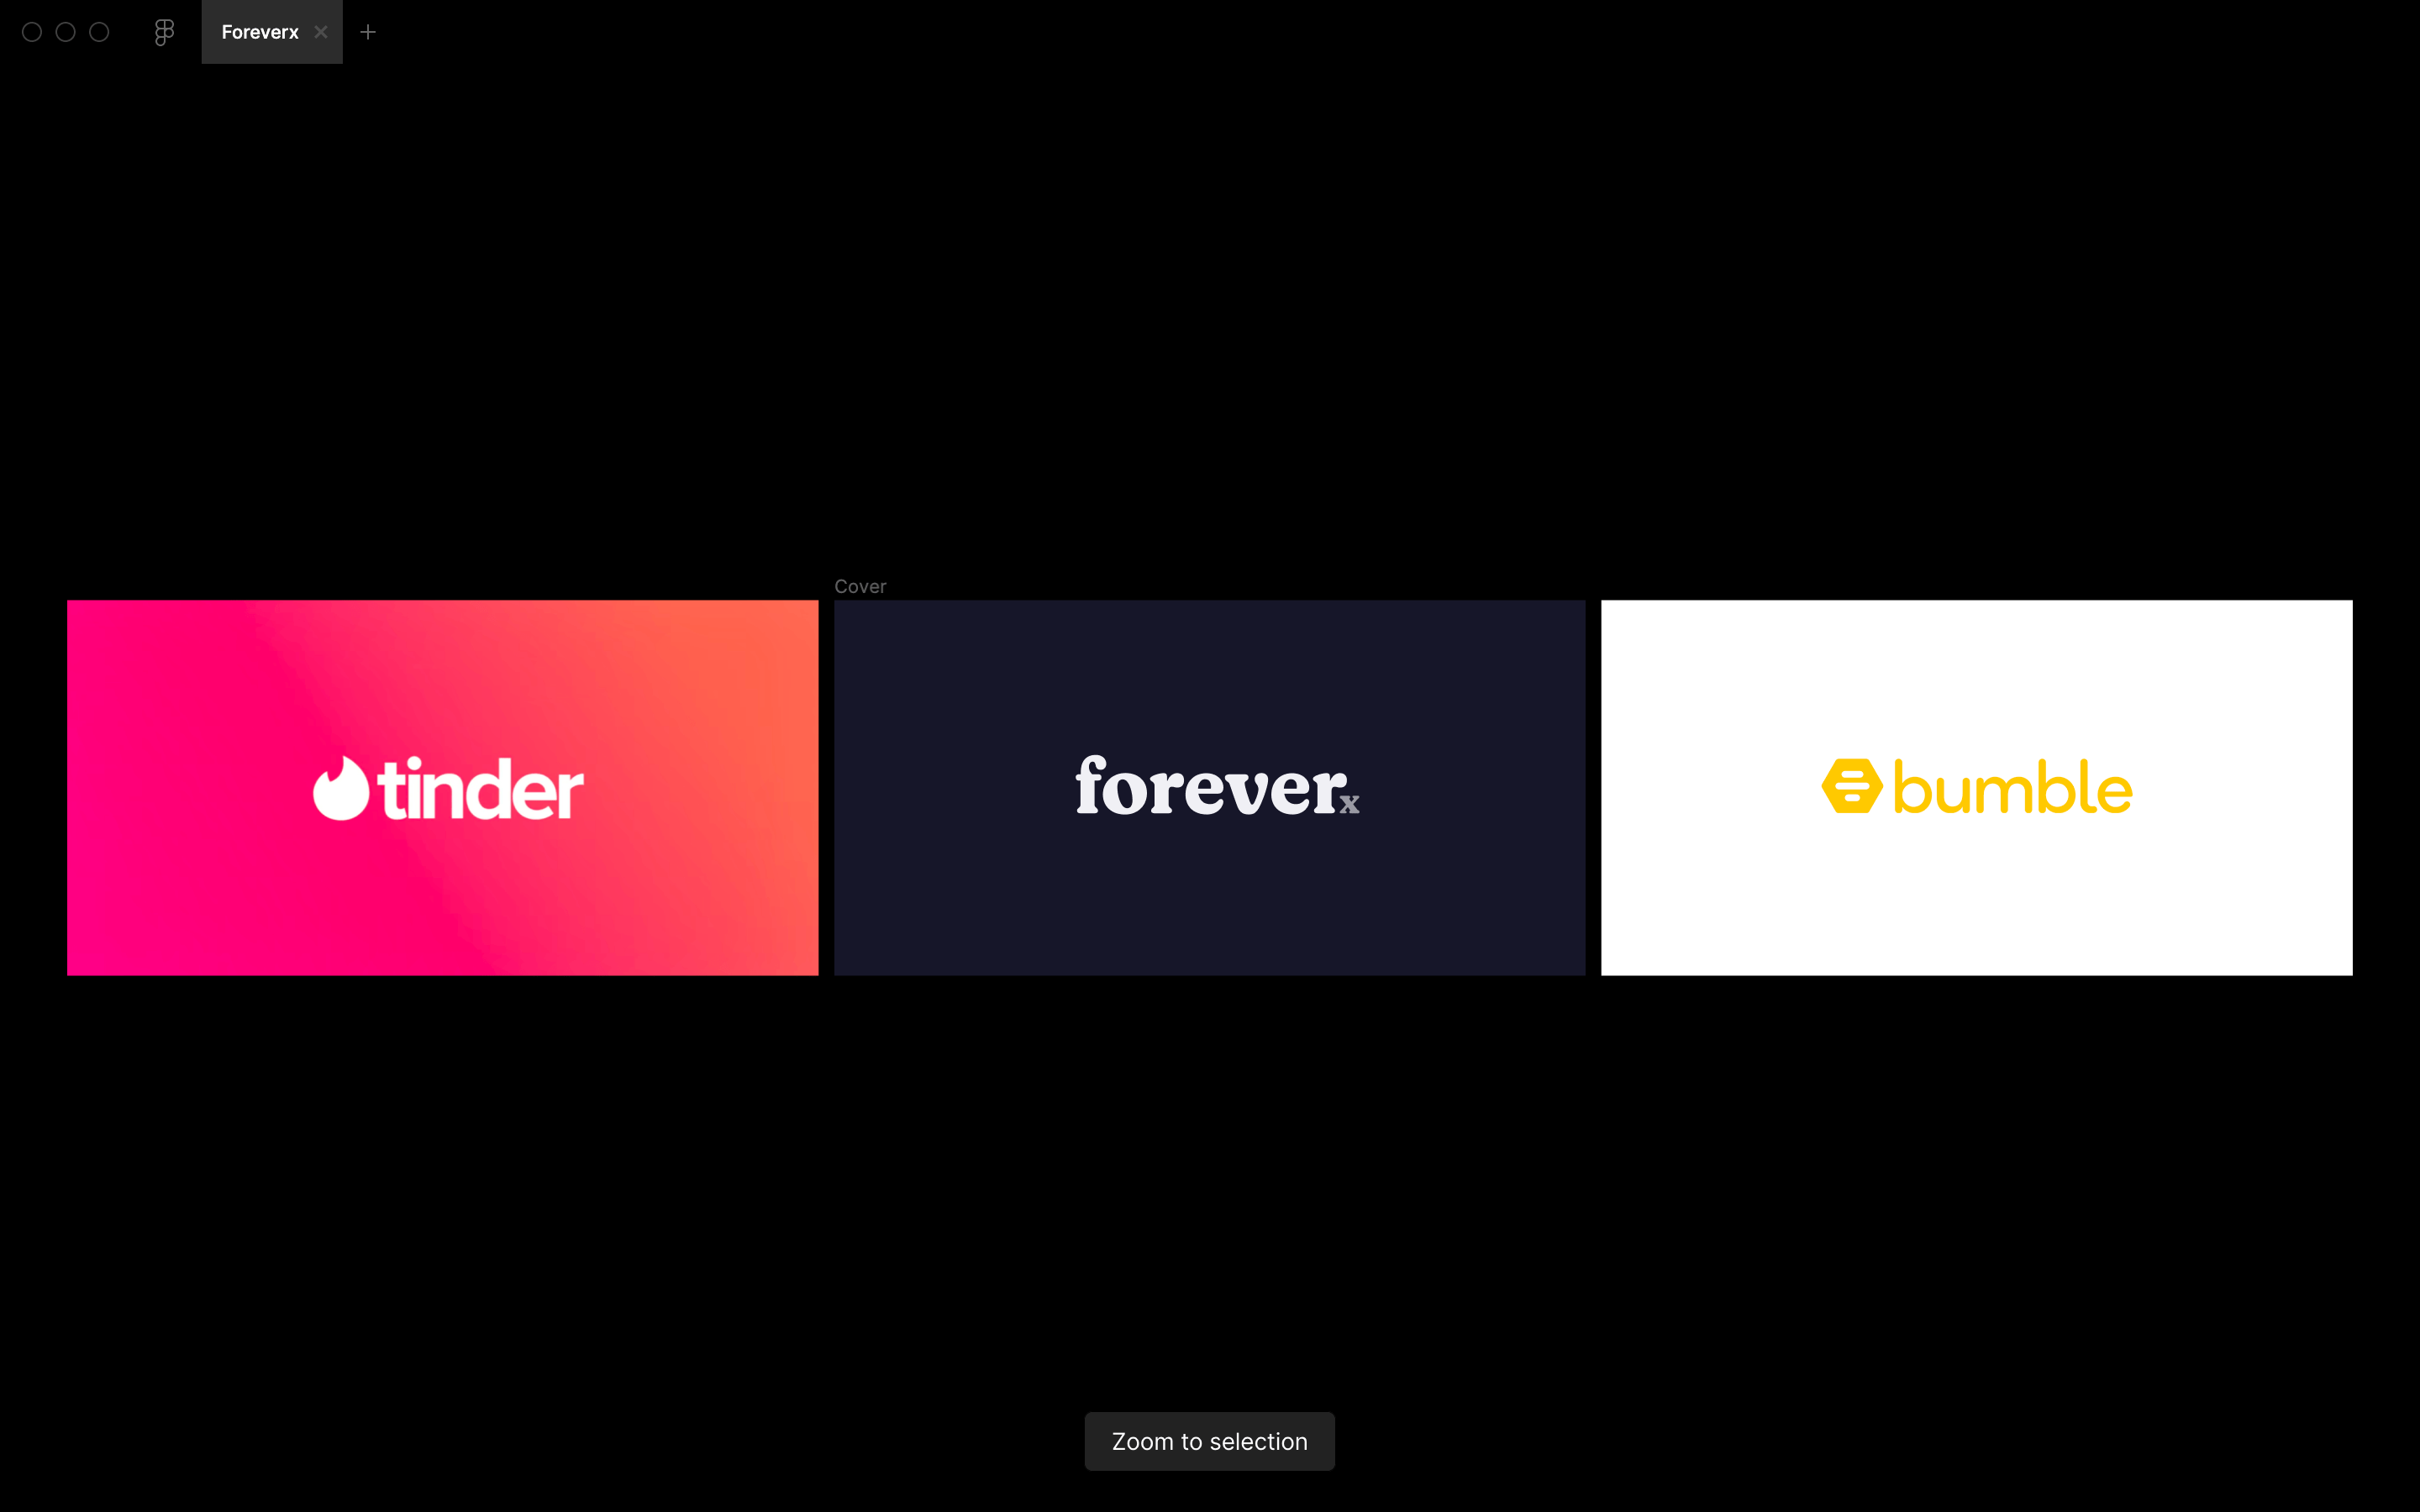 foreverx logo next to competition such as tinder. and bumble